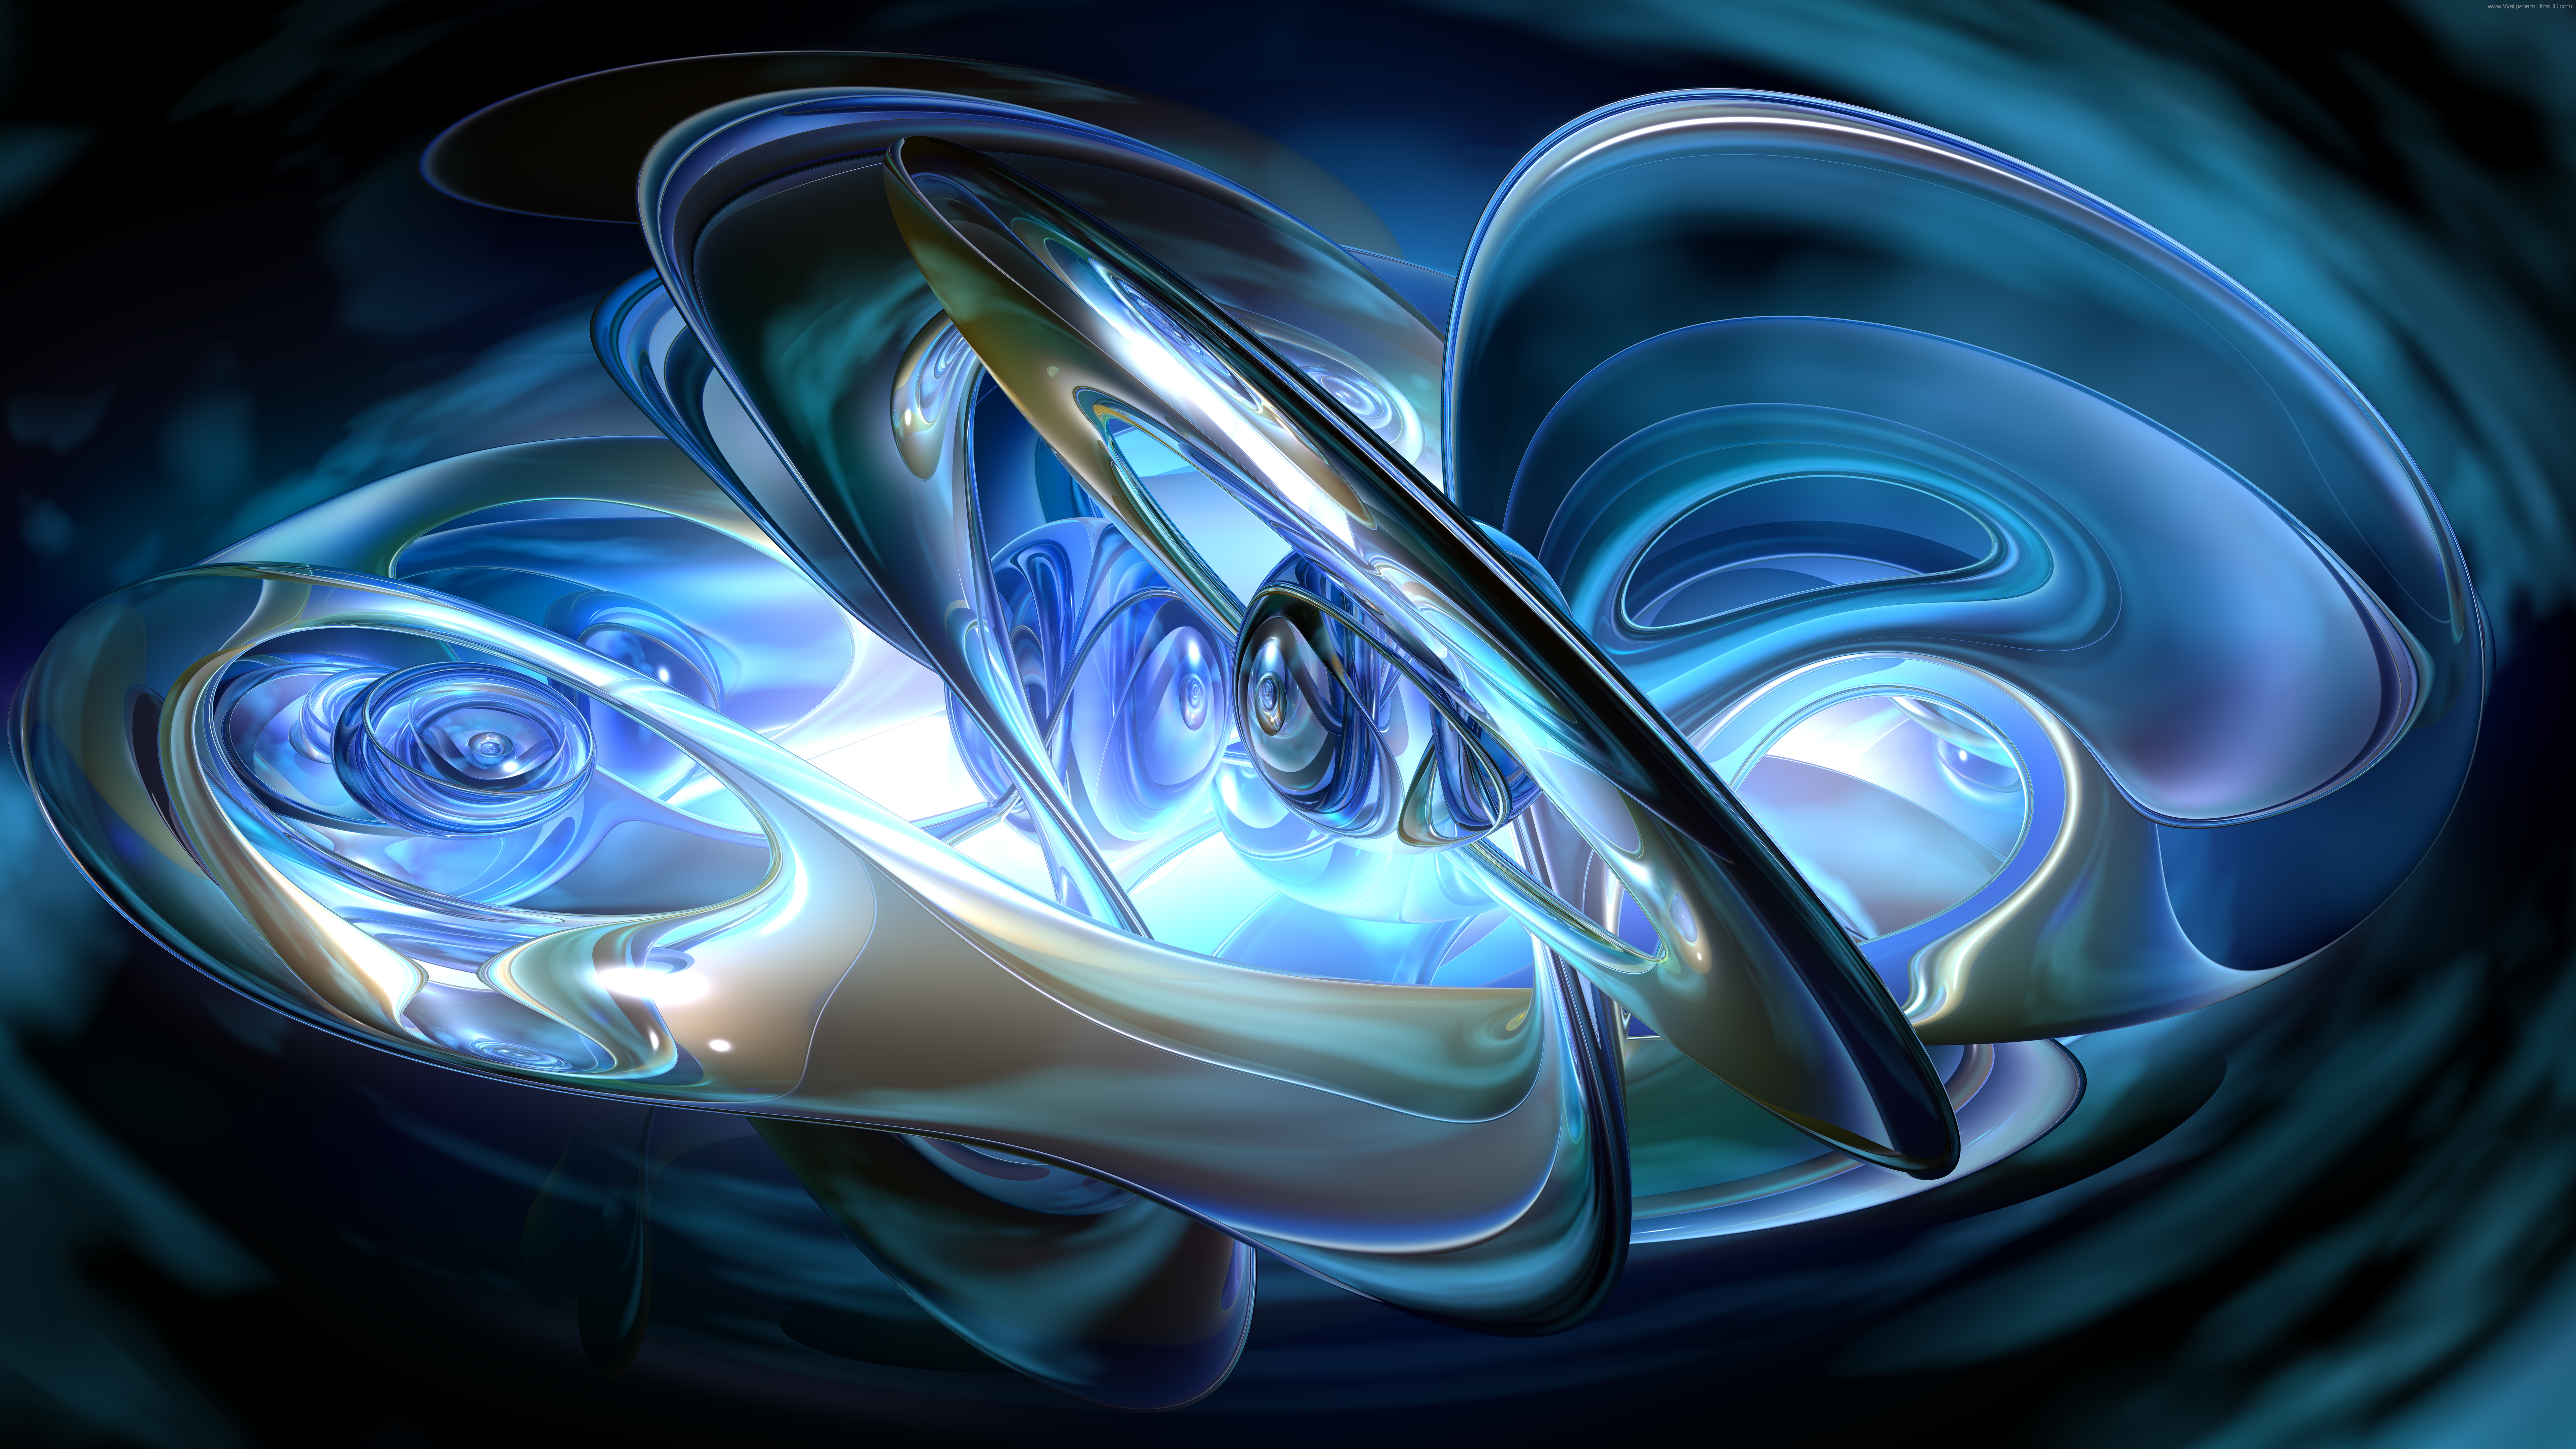 Deep 3D Abstract 4K Wallpapers  HD Wallpapers  ID 27274